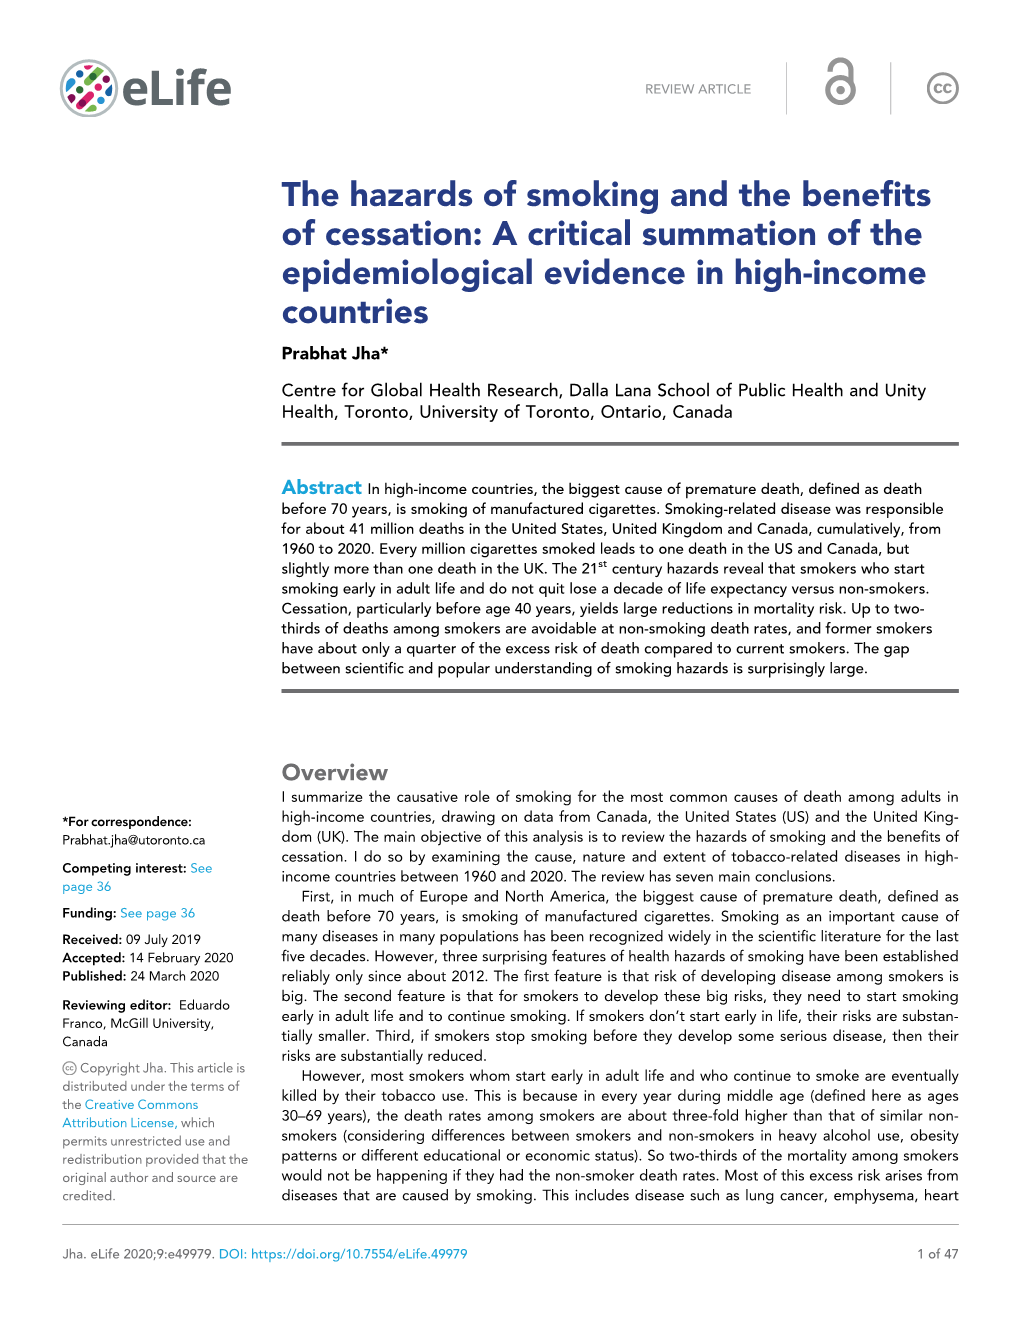 The Hazards of Smoking and the Benefits of Cessation: a Critical Summation of the Epidemiological Evidence in High-Income Countries Prabhat Jha*